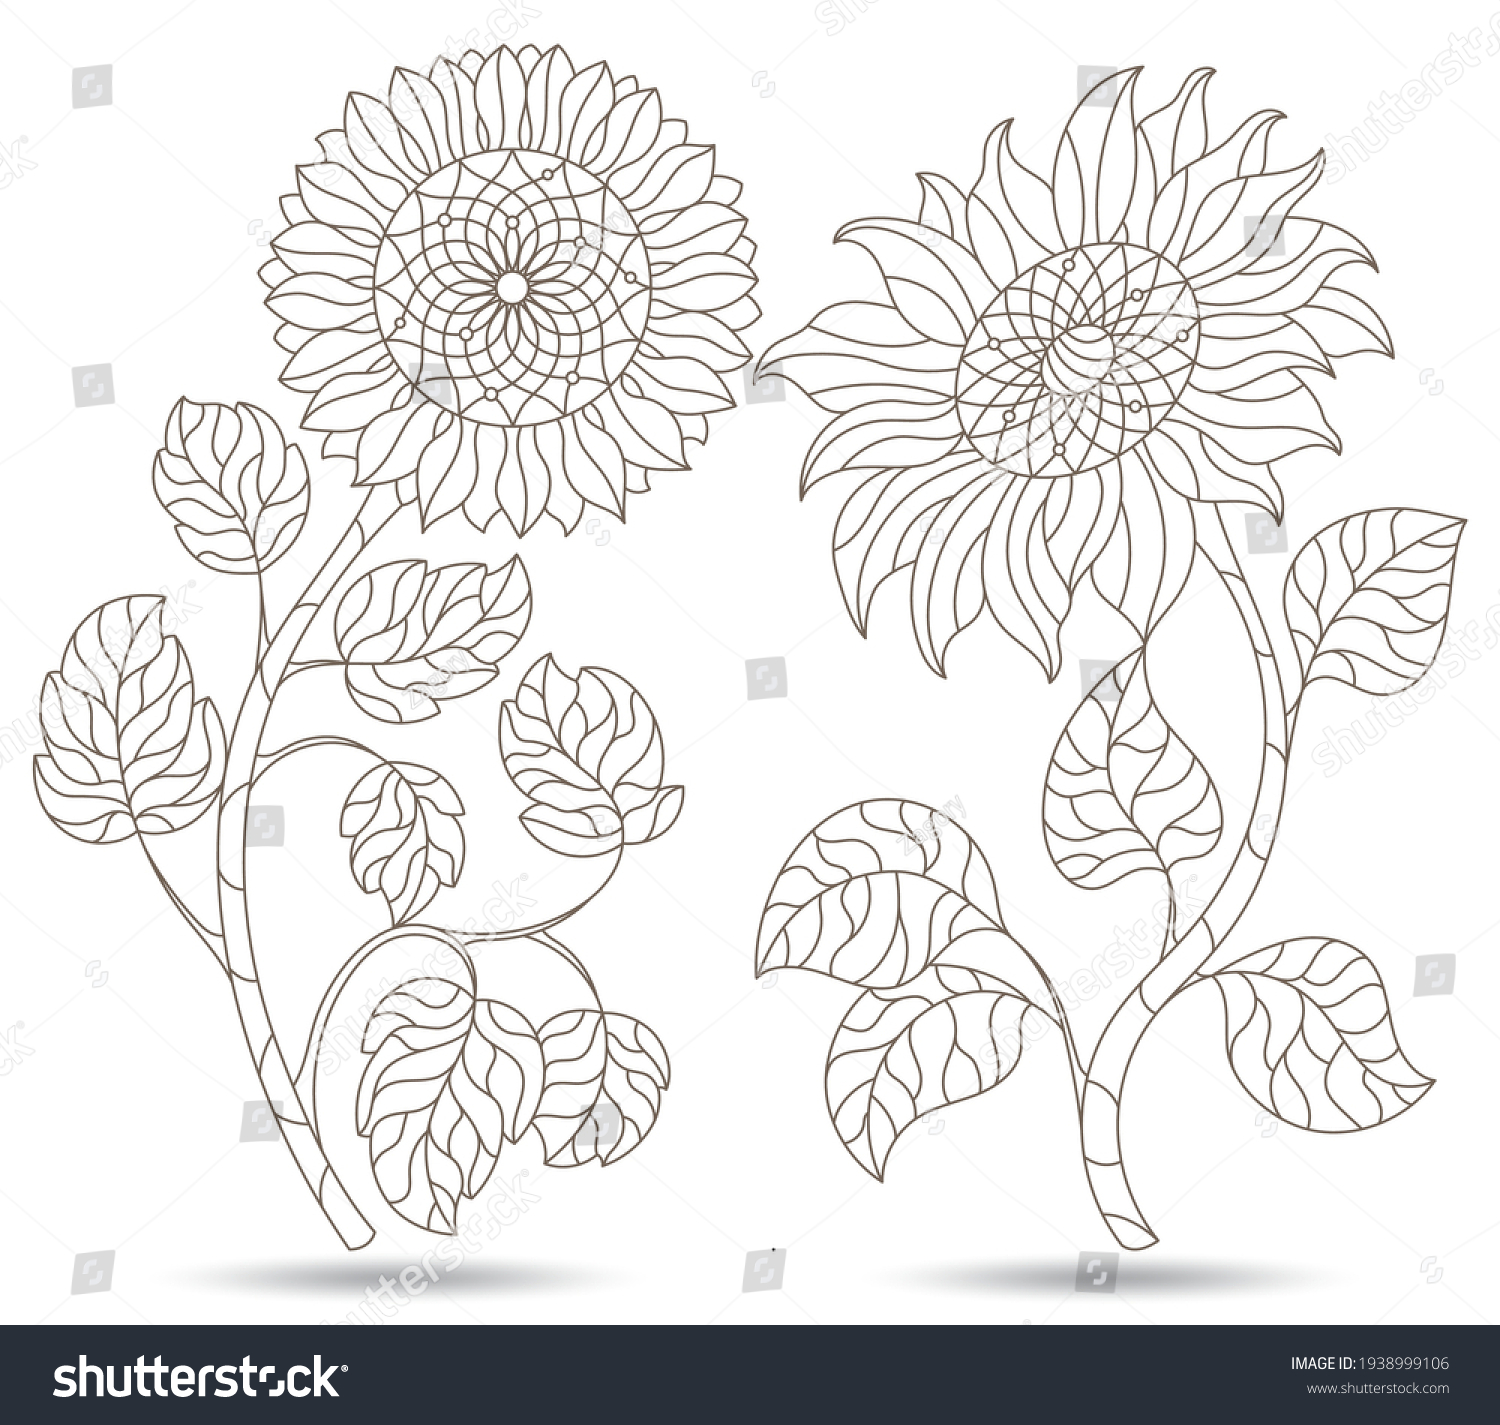 Stained glass sunflower images stock photos d objects vectors